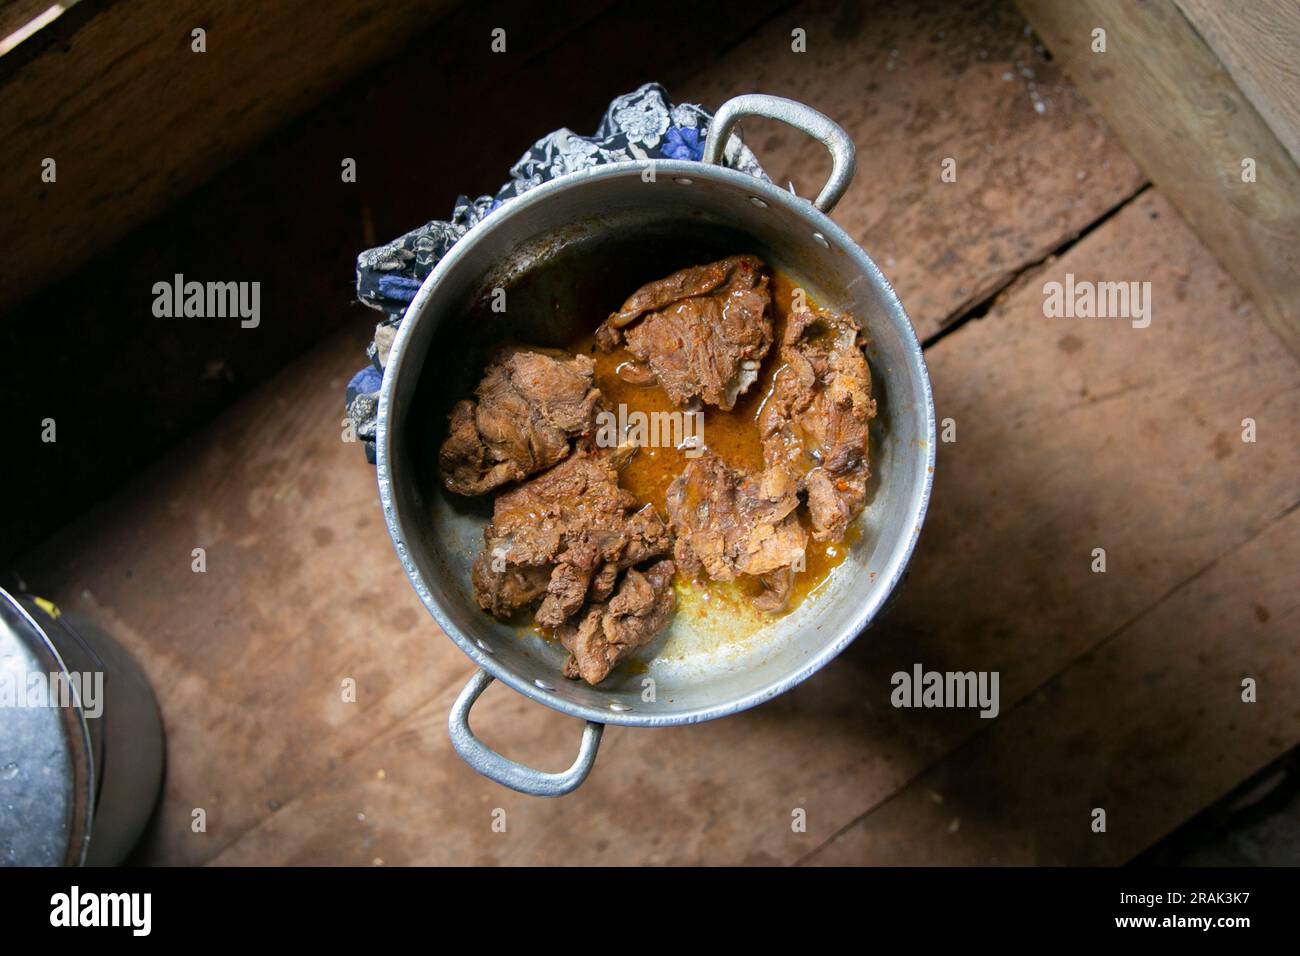 Majaz stewed. The majaz or paca is a species of rodent for meat that is highly valued and commonly consumed in the Peruvian jungle. Stock Photo